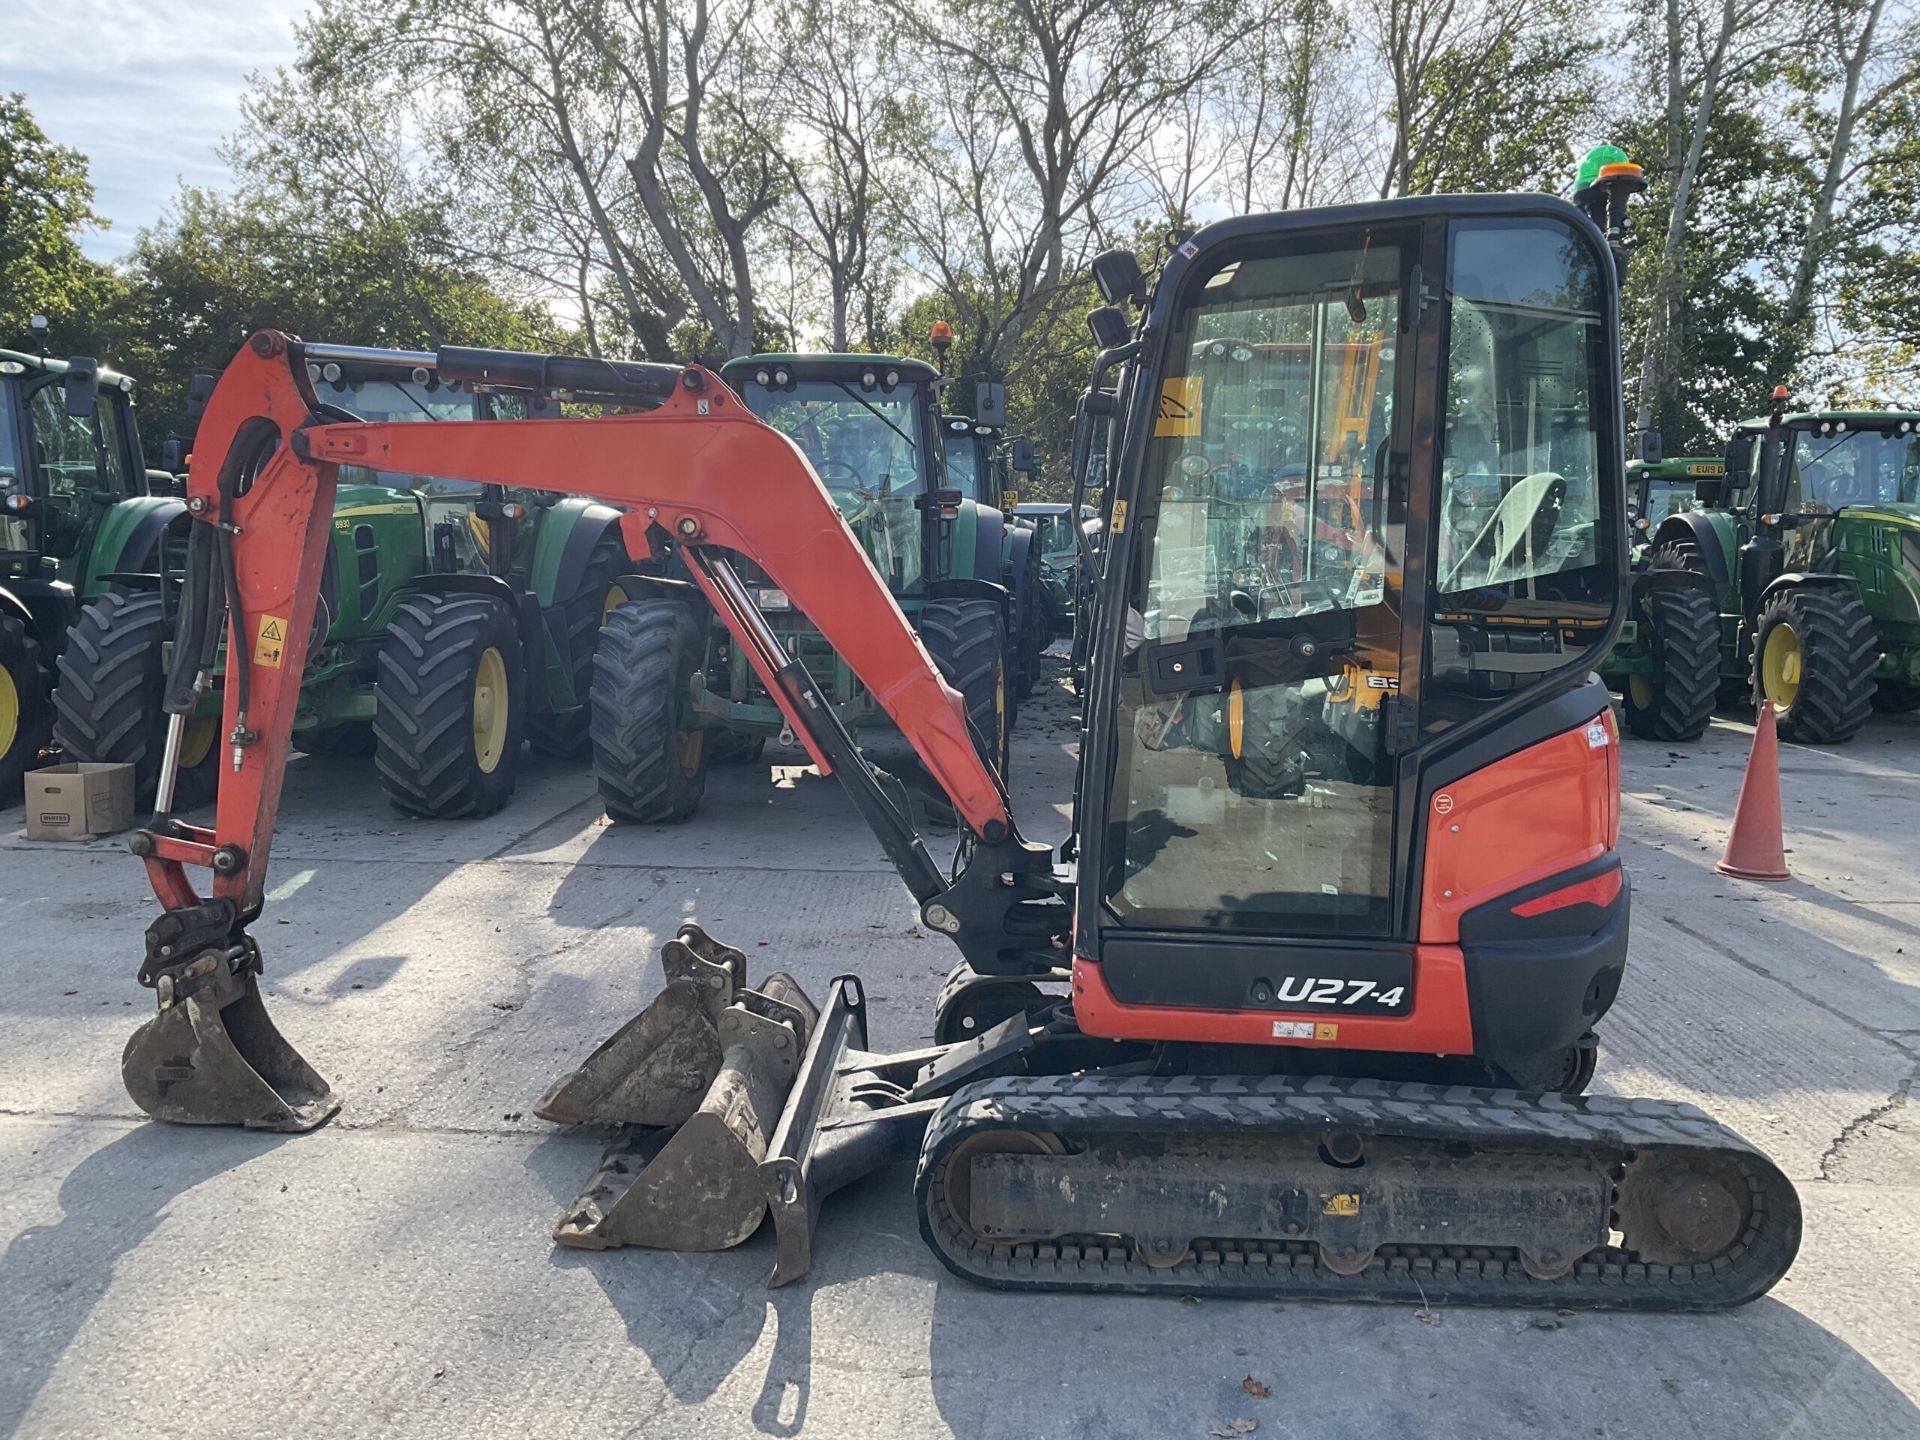 KUBOTA U27-4. RUBBER TRACKS. PIPED. FRONT BLADE. 3 BUCKETS. QUICK HITCH. 2 SPEED TRACKING. - Image 9 of 9